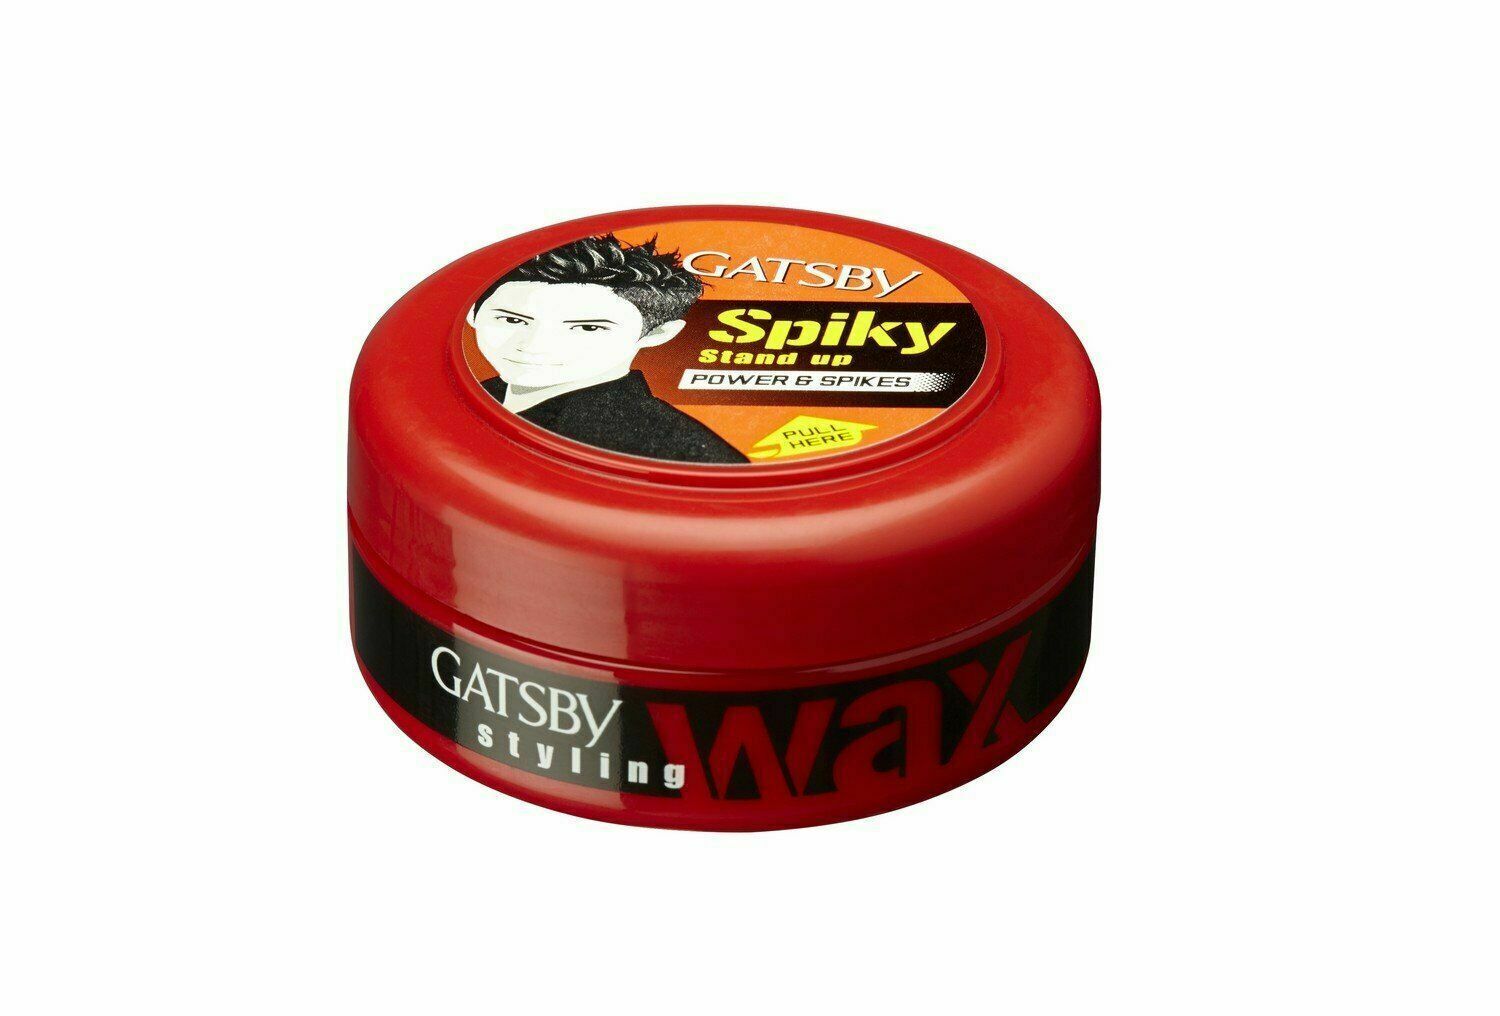 Gatsby Styling Wax Power & Spikes Hair Styler, 75gm / 2.65 oz (Pack of 1)